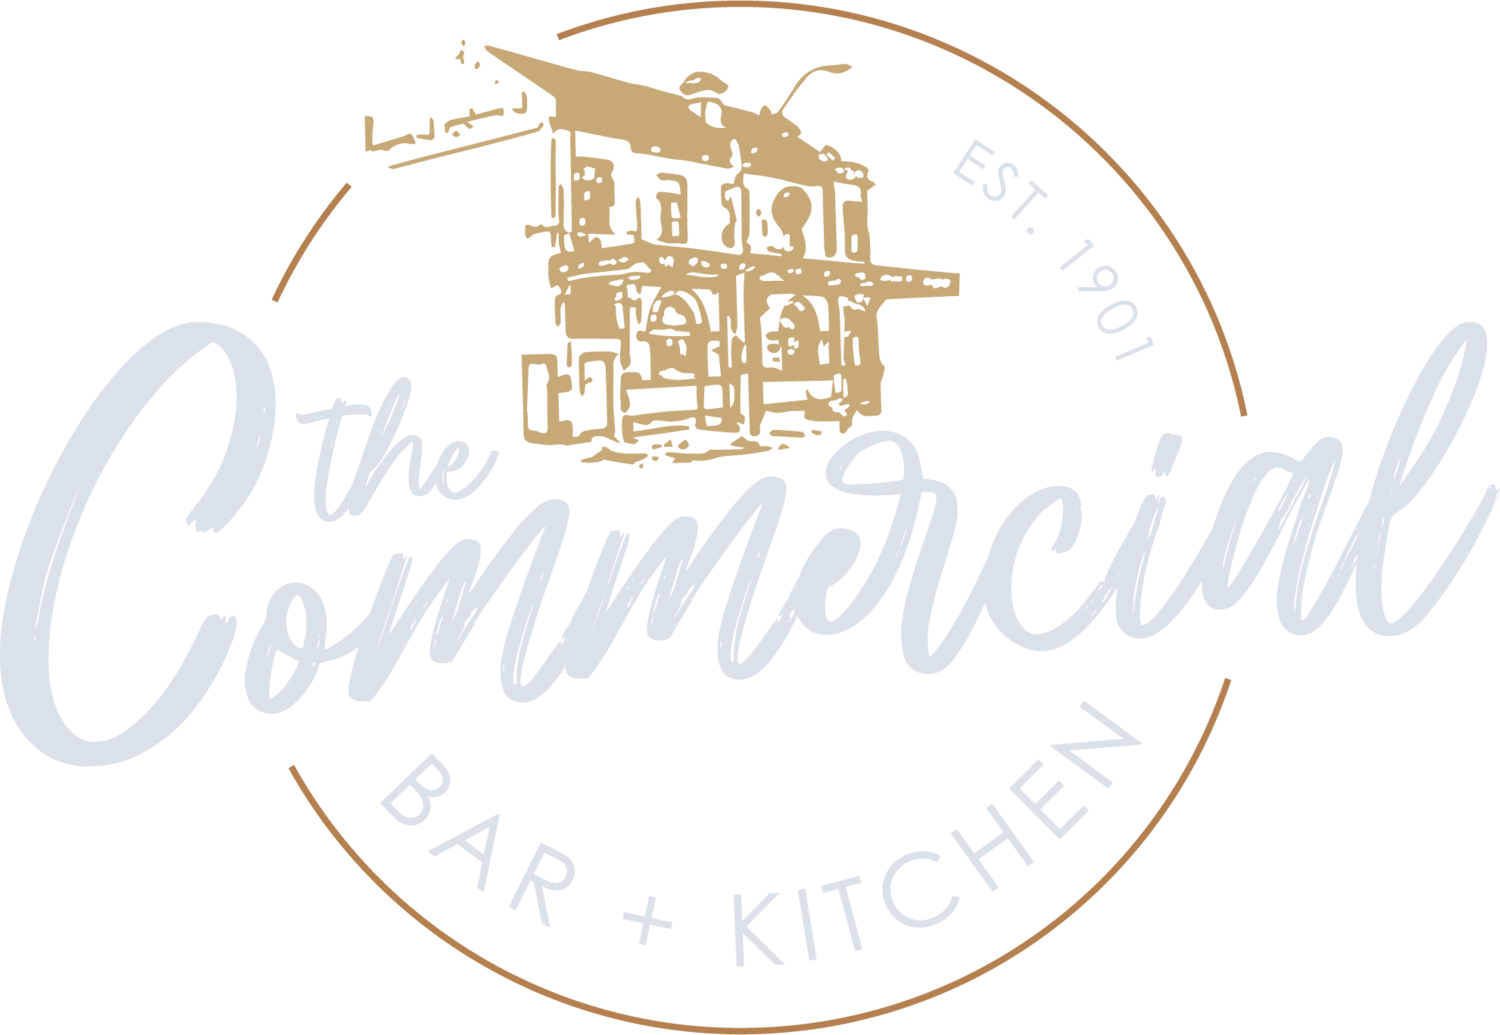 The Commercial Bar and Kitchen